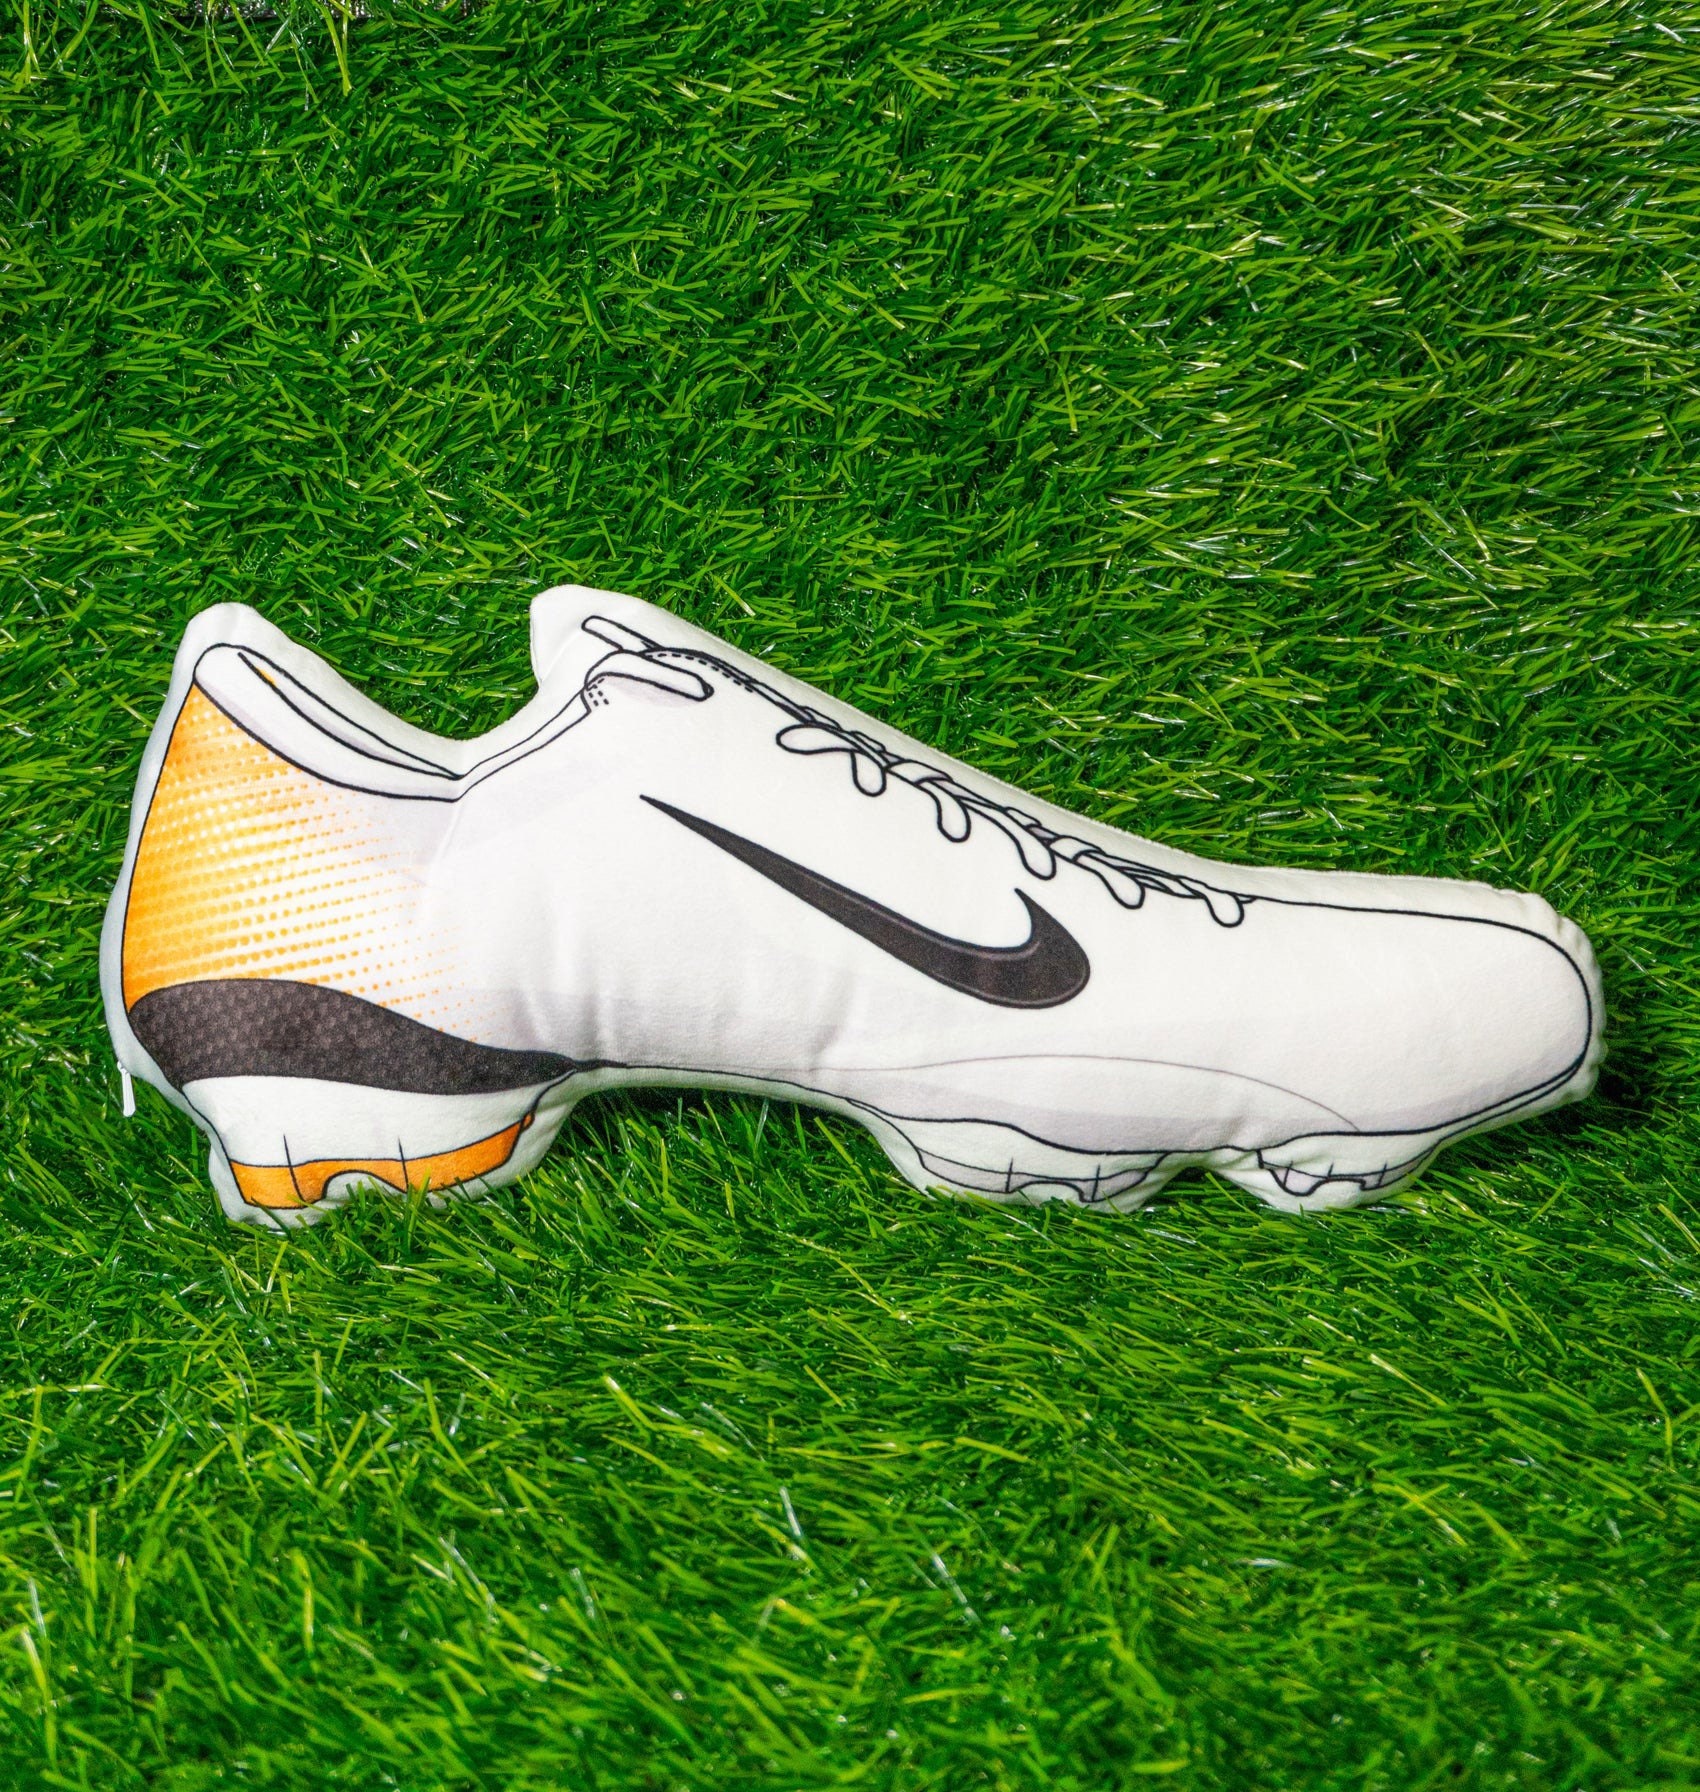 Nike Mercurial Vapour III Gold & White 2006 Football Boot - Etsy